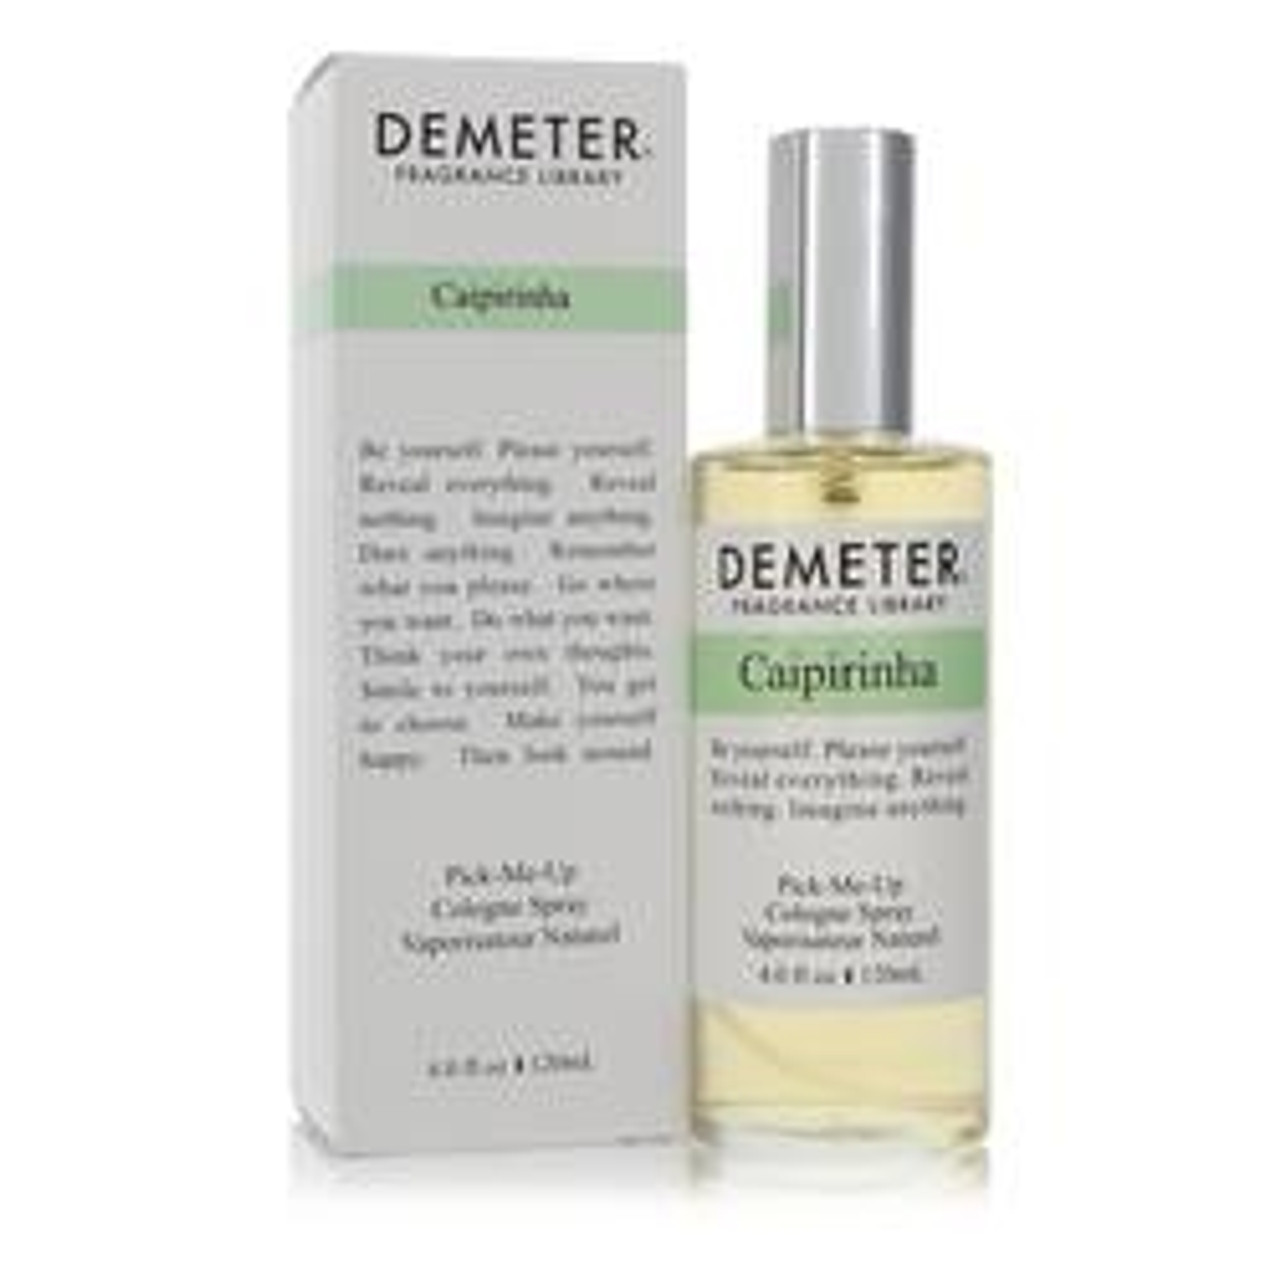 Demeter Caipirinha Cologne By Demeter Pick Me Up Cologne Spray (Unisex) 4 oz for Men - [From 79.50 - Choose pk Qty ] - *Ships from Miami